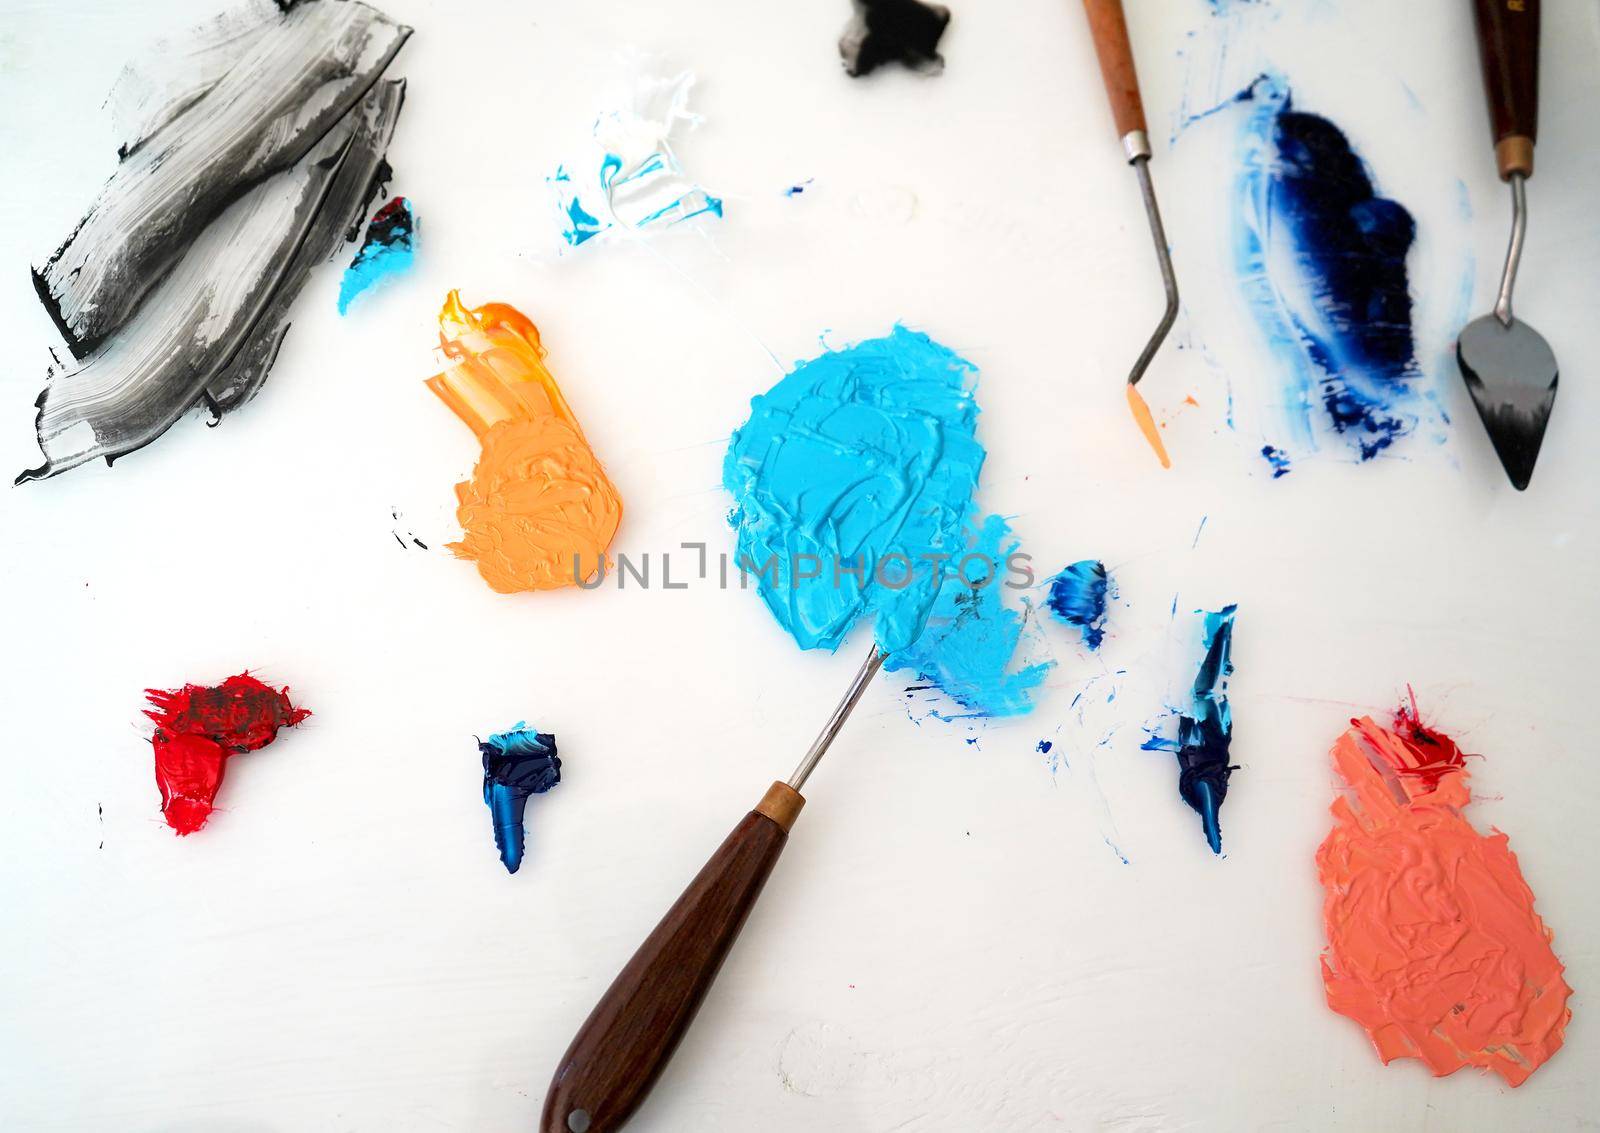 Detail of paint brushes and bright paint in an artist’s studio by fivepointsix